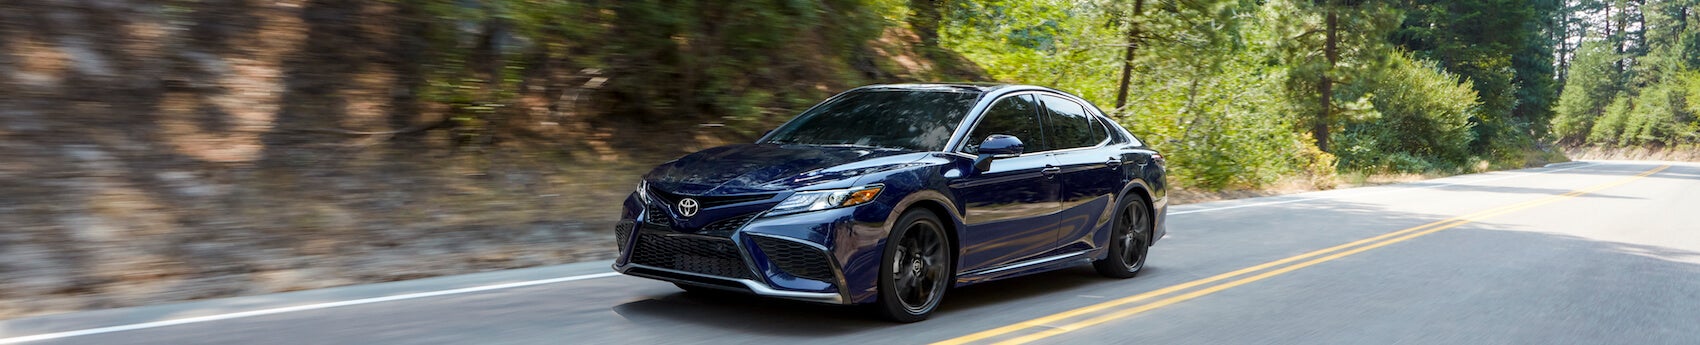 2021 Toyota Camry lease deals Zanesville, OH